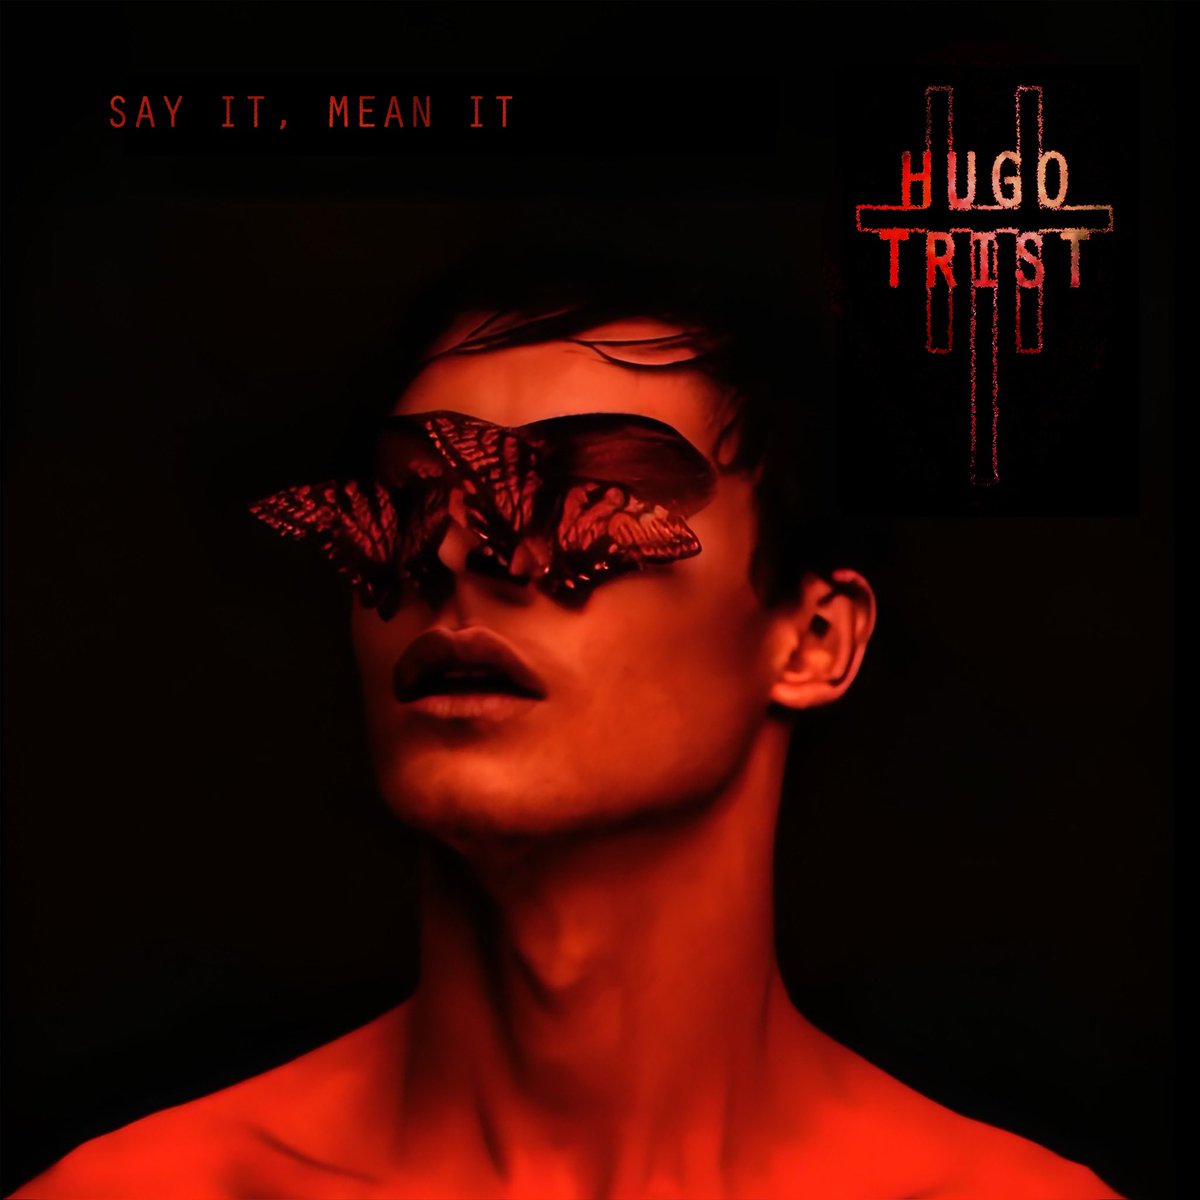 Let the rhythm hit’em! With its hard-hitting beats, @hugo_trist ’s new single “Say It, Mean It” is a raw and authentic future garage blast. Listen: found.ee/hugotrist_sayi… #ukgarage #futuregarage